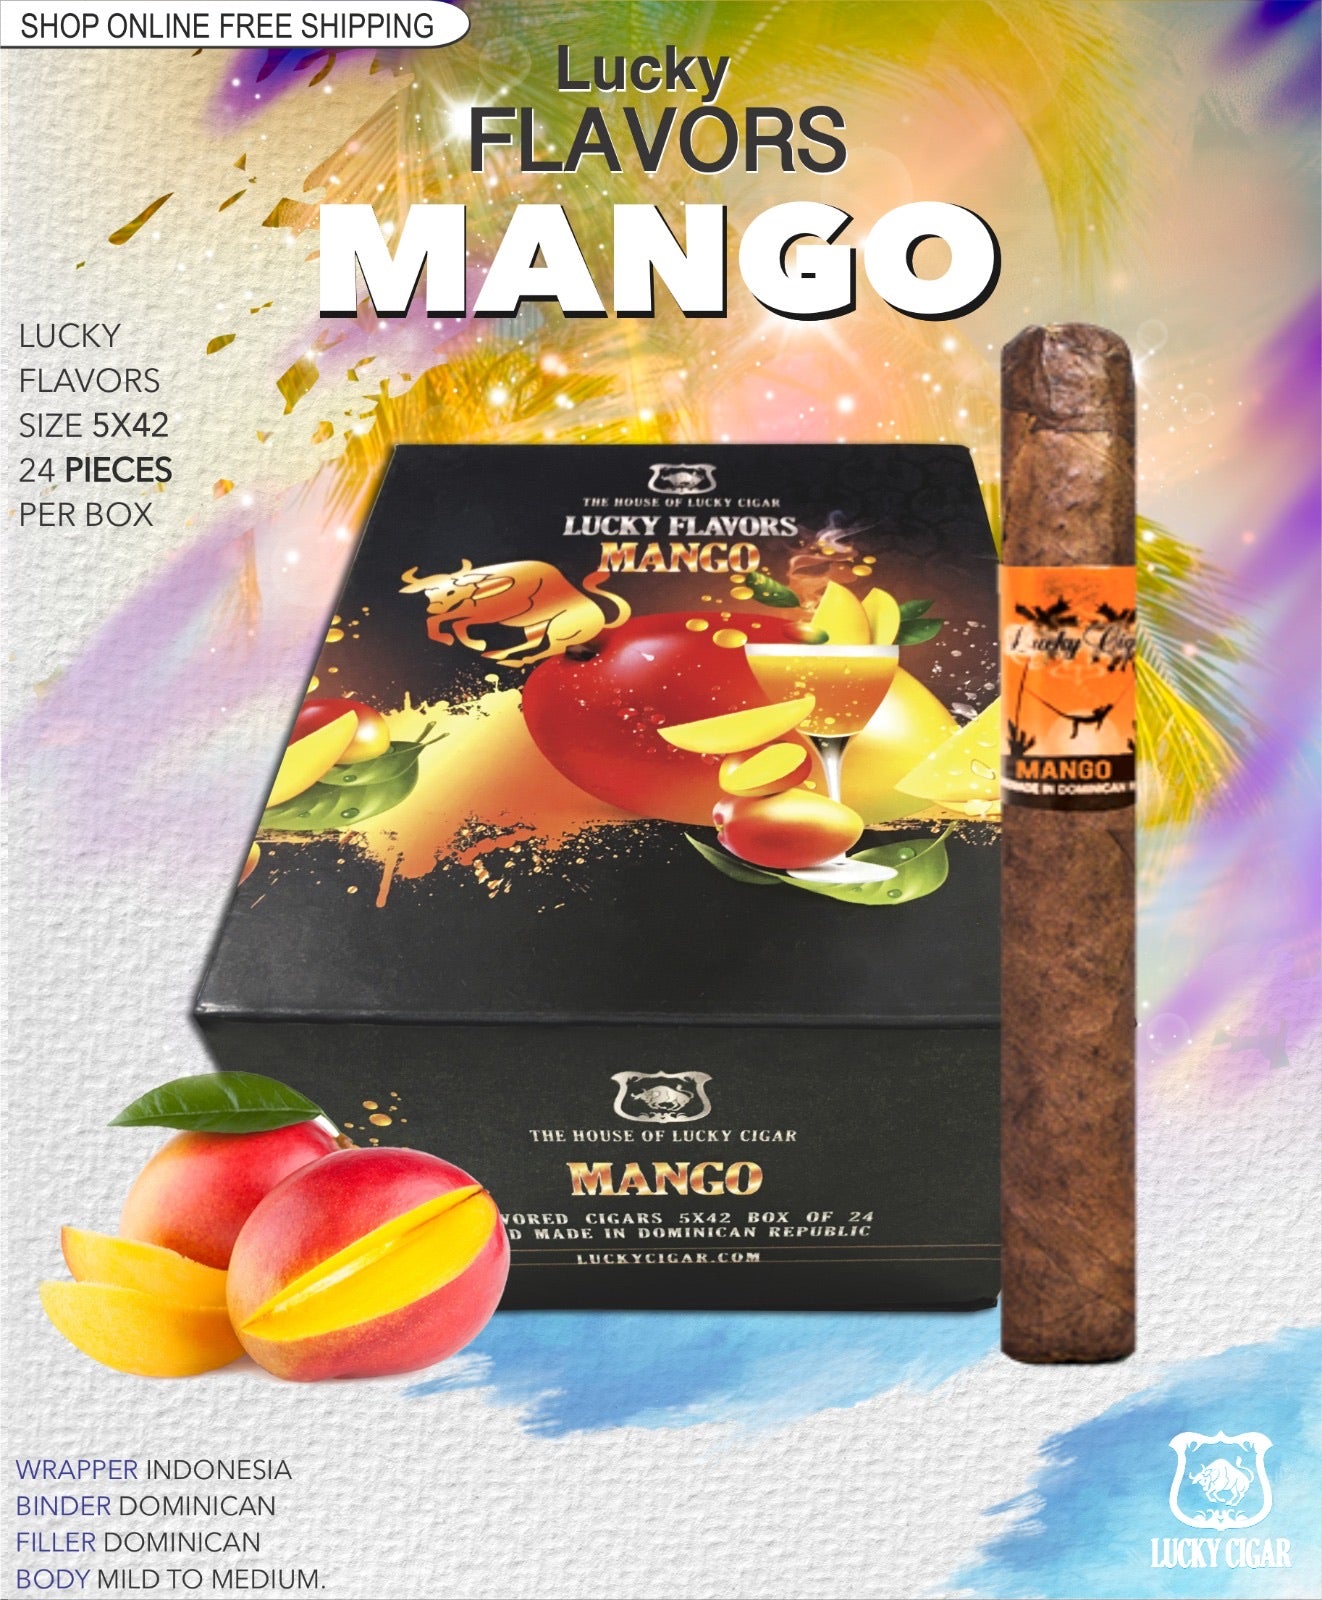 Flavored Cigars: Lucky Flavors Mango 5x42 Box of 24 Cigars